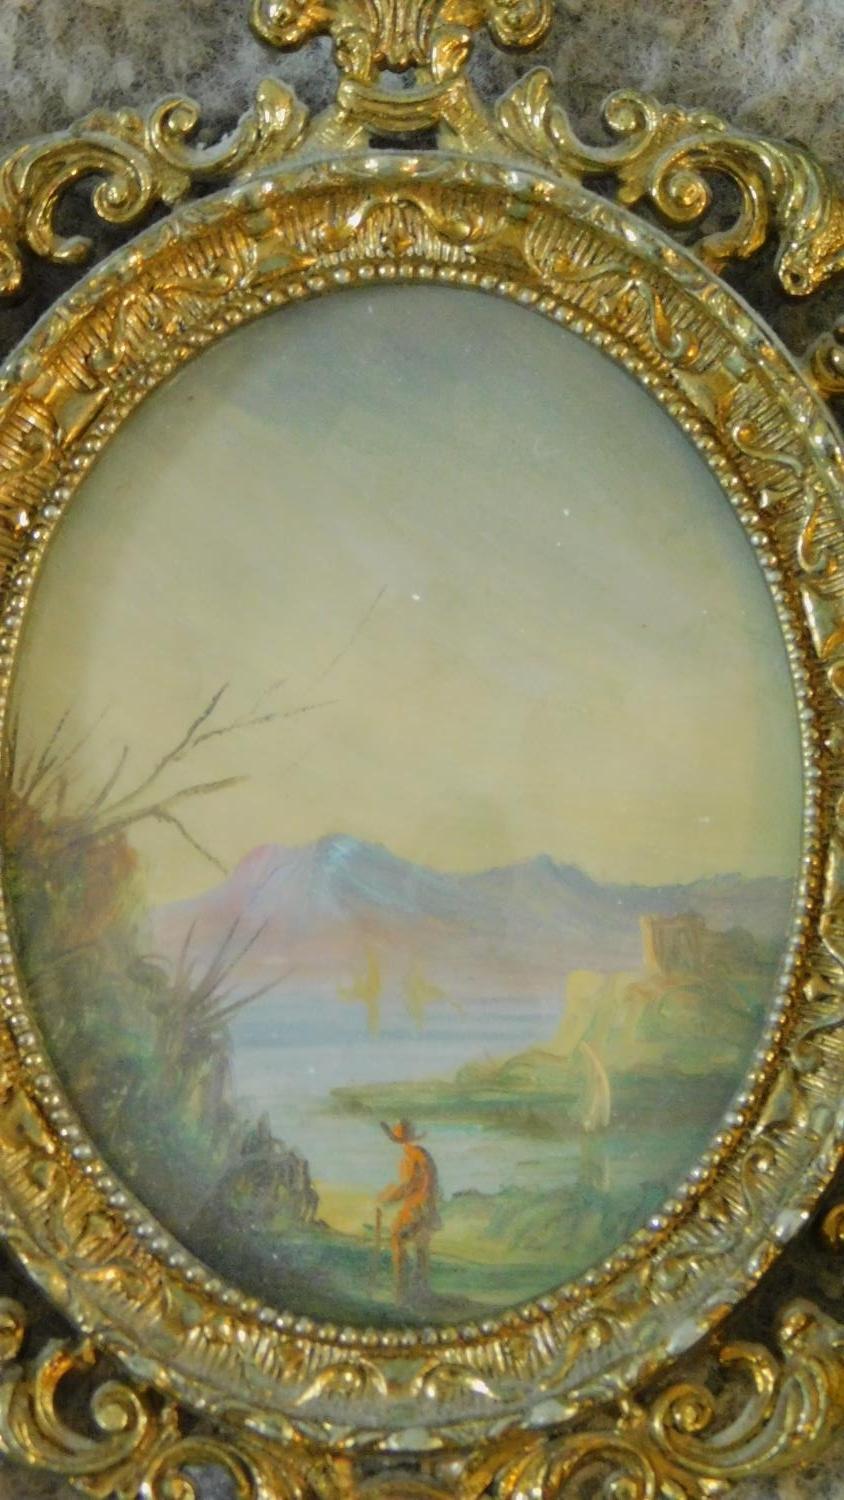 A pair of miniature prints, interior scenes and an oval landscape scene, all in decorative gilt - Image 4 of 5